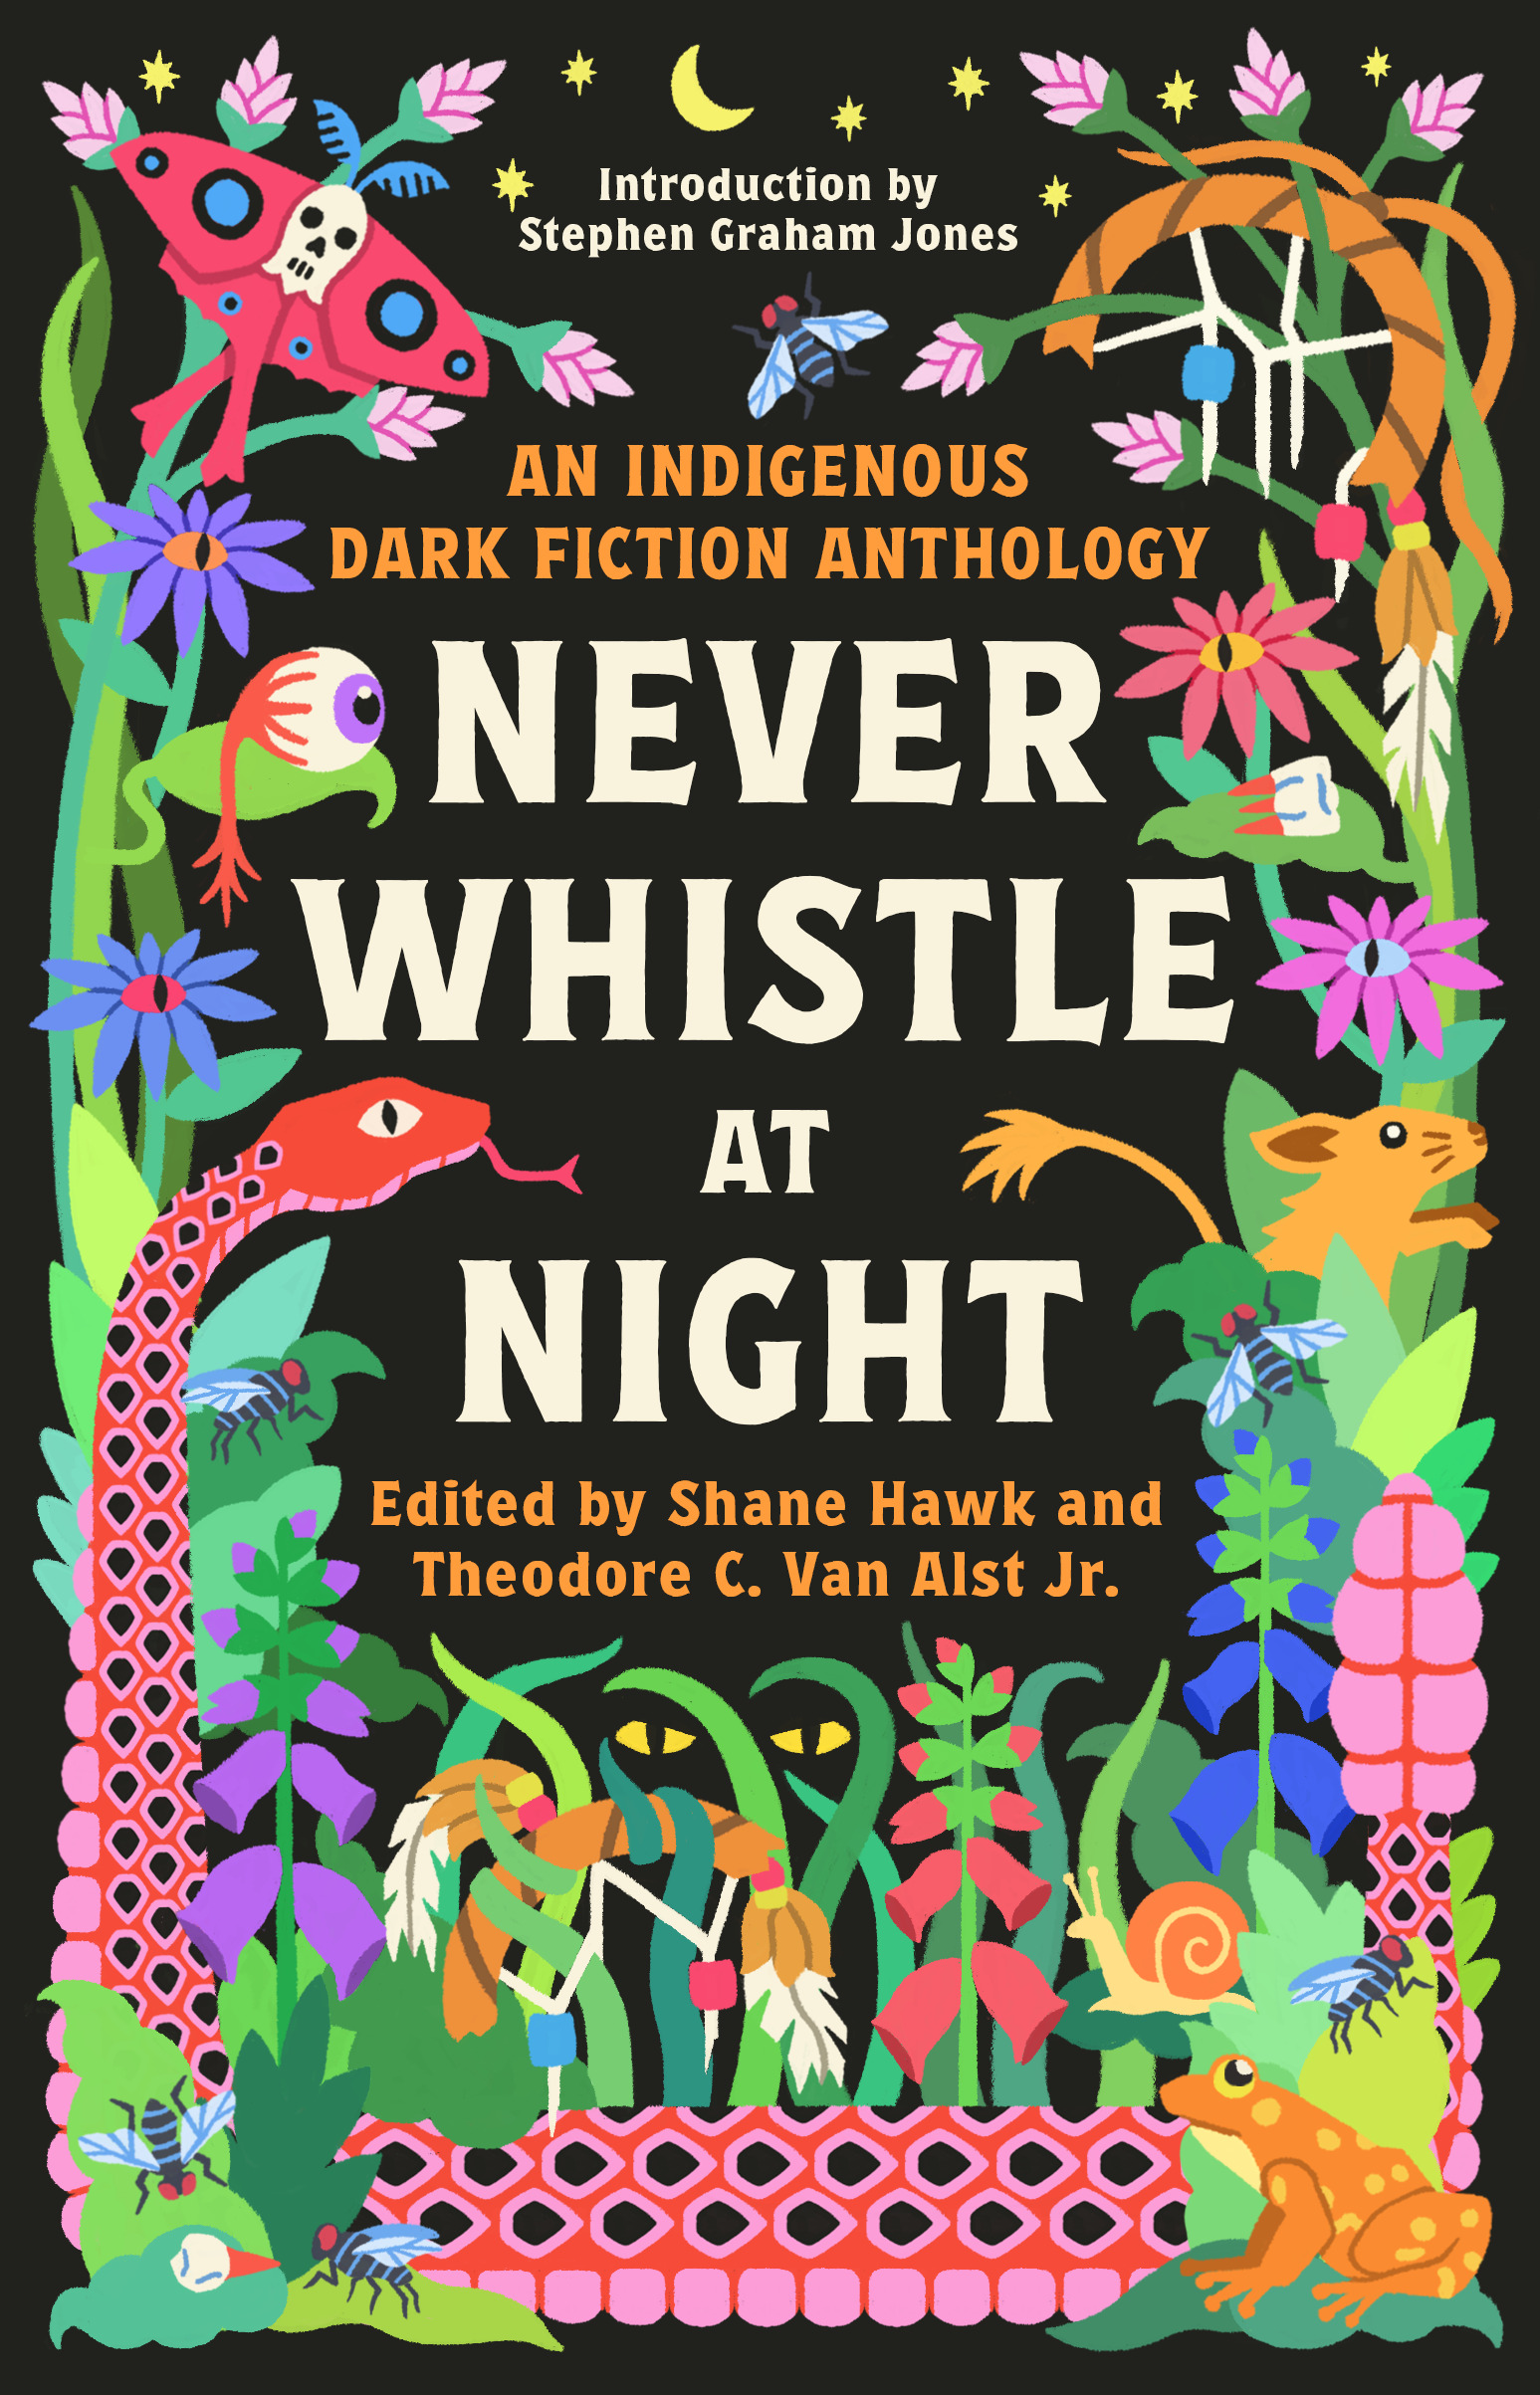 Never Whistle at Night: An Indigenous Dark Fiction Anthology : Are You Ready to Be Un-Settled? | 